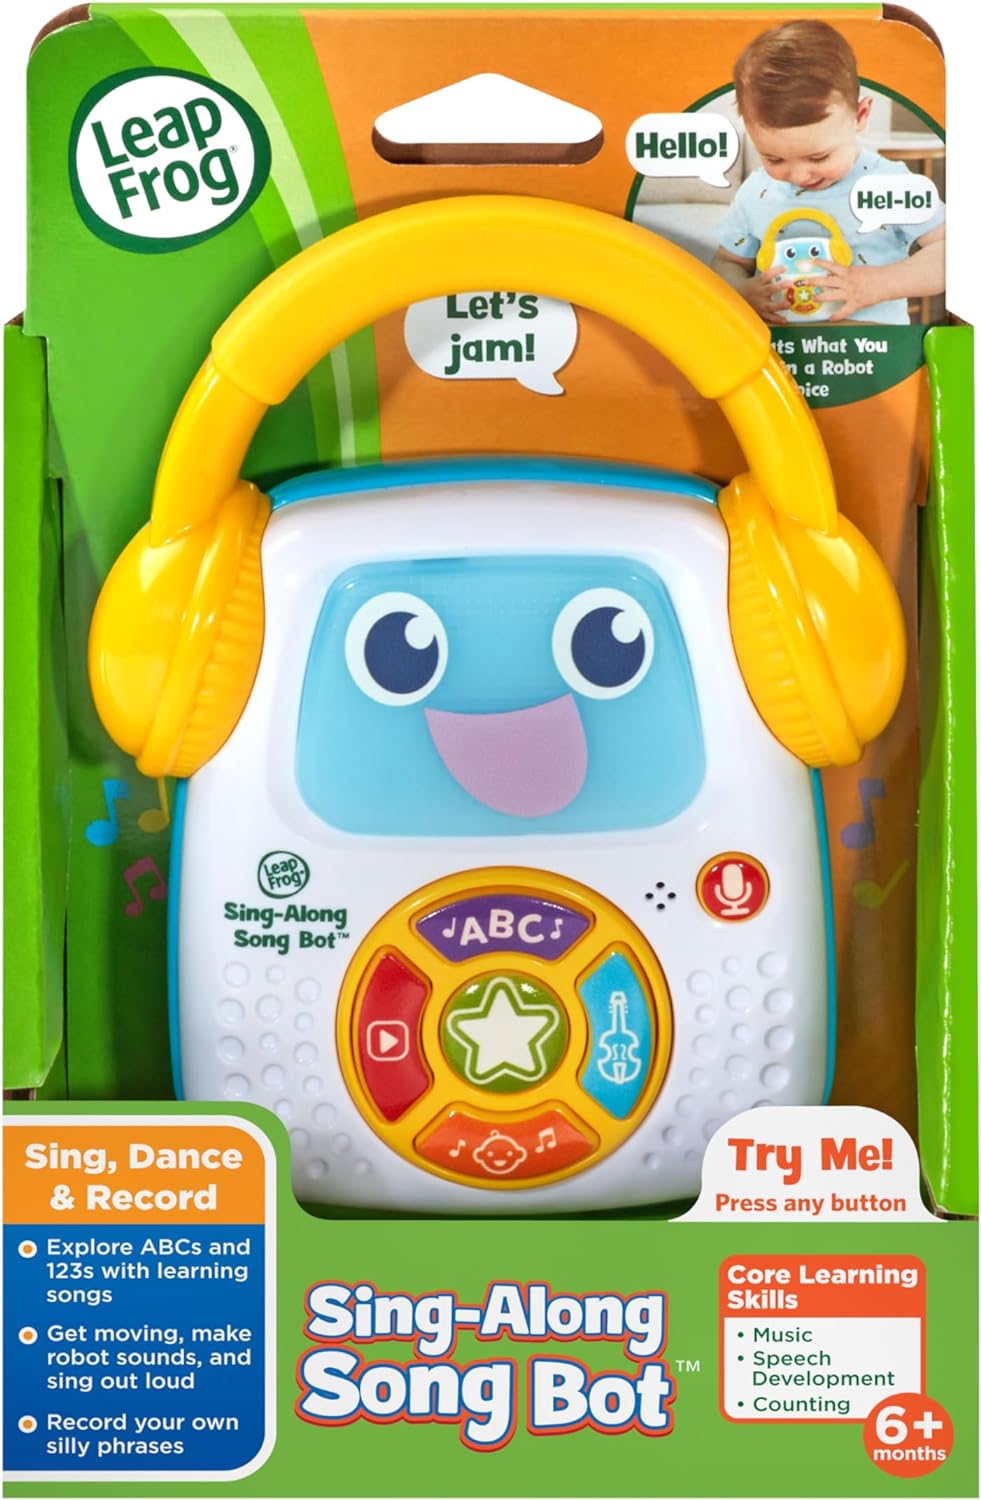 Leap Frog Sing A Long Song Bot 3 x AAA demo batteries included